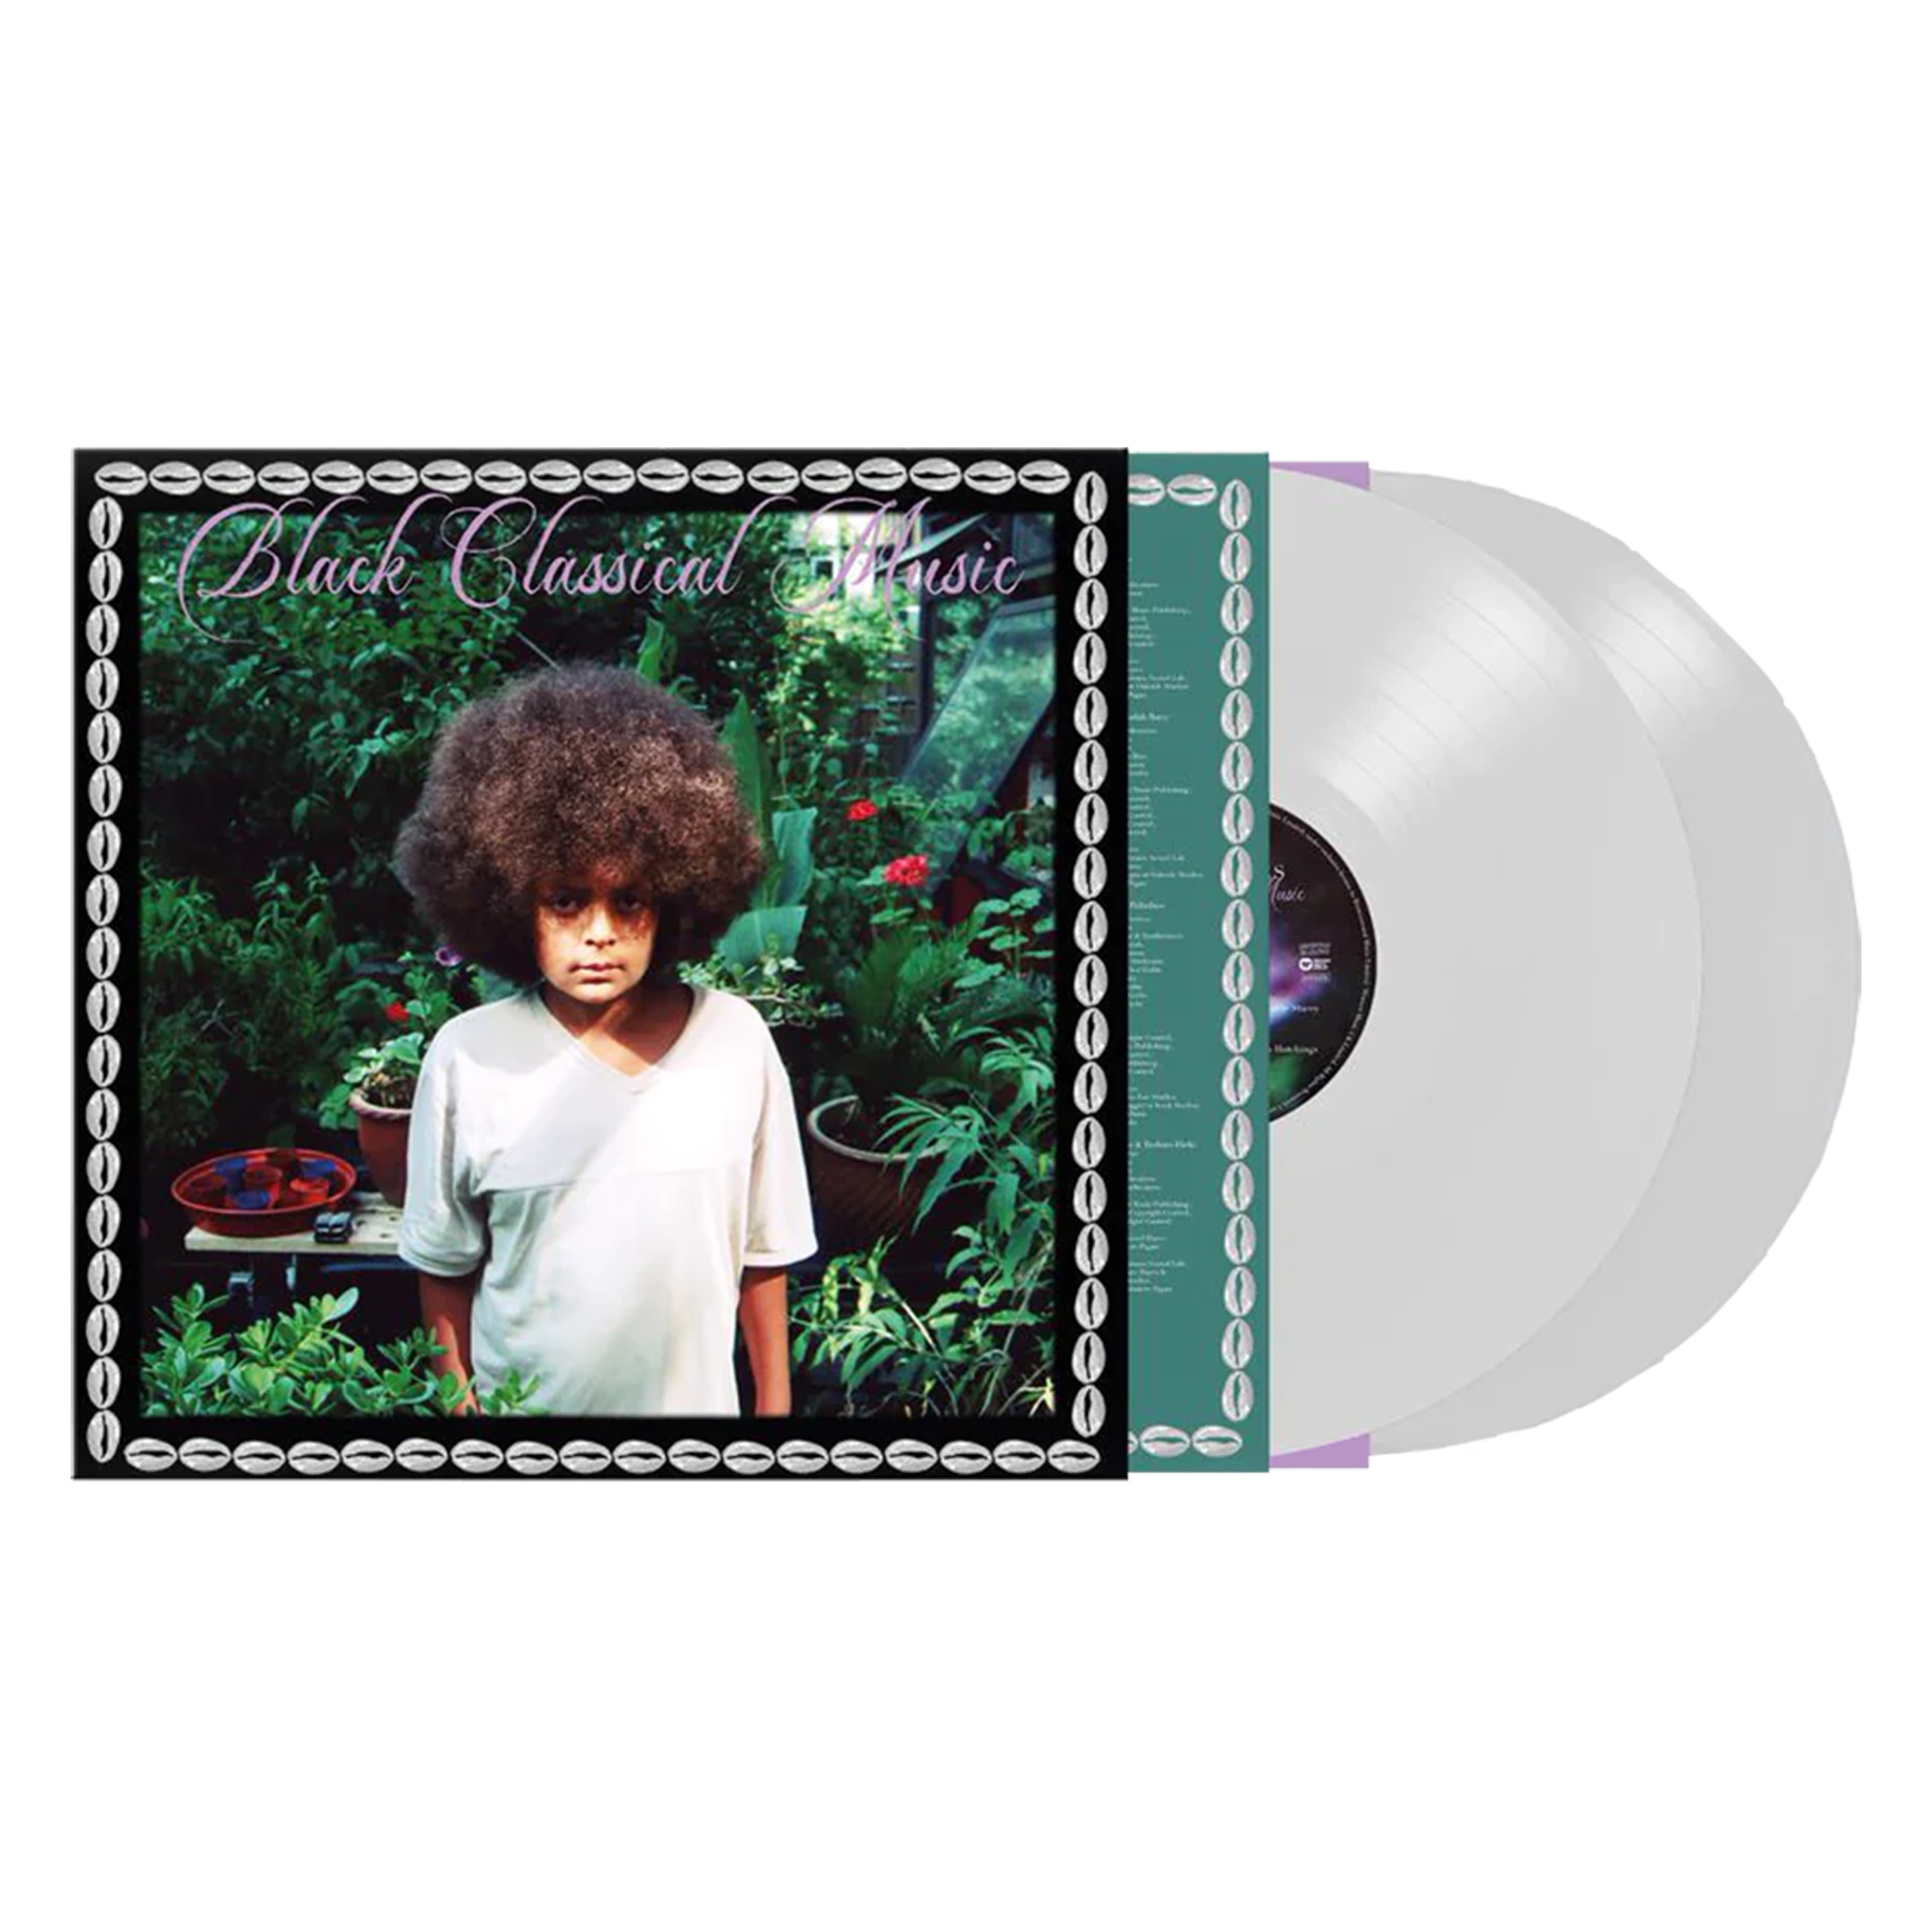 Black Classical Music: Limited Edition White Vinyl 2LP + Signed Print